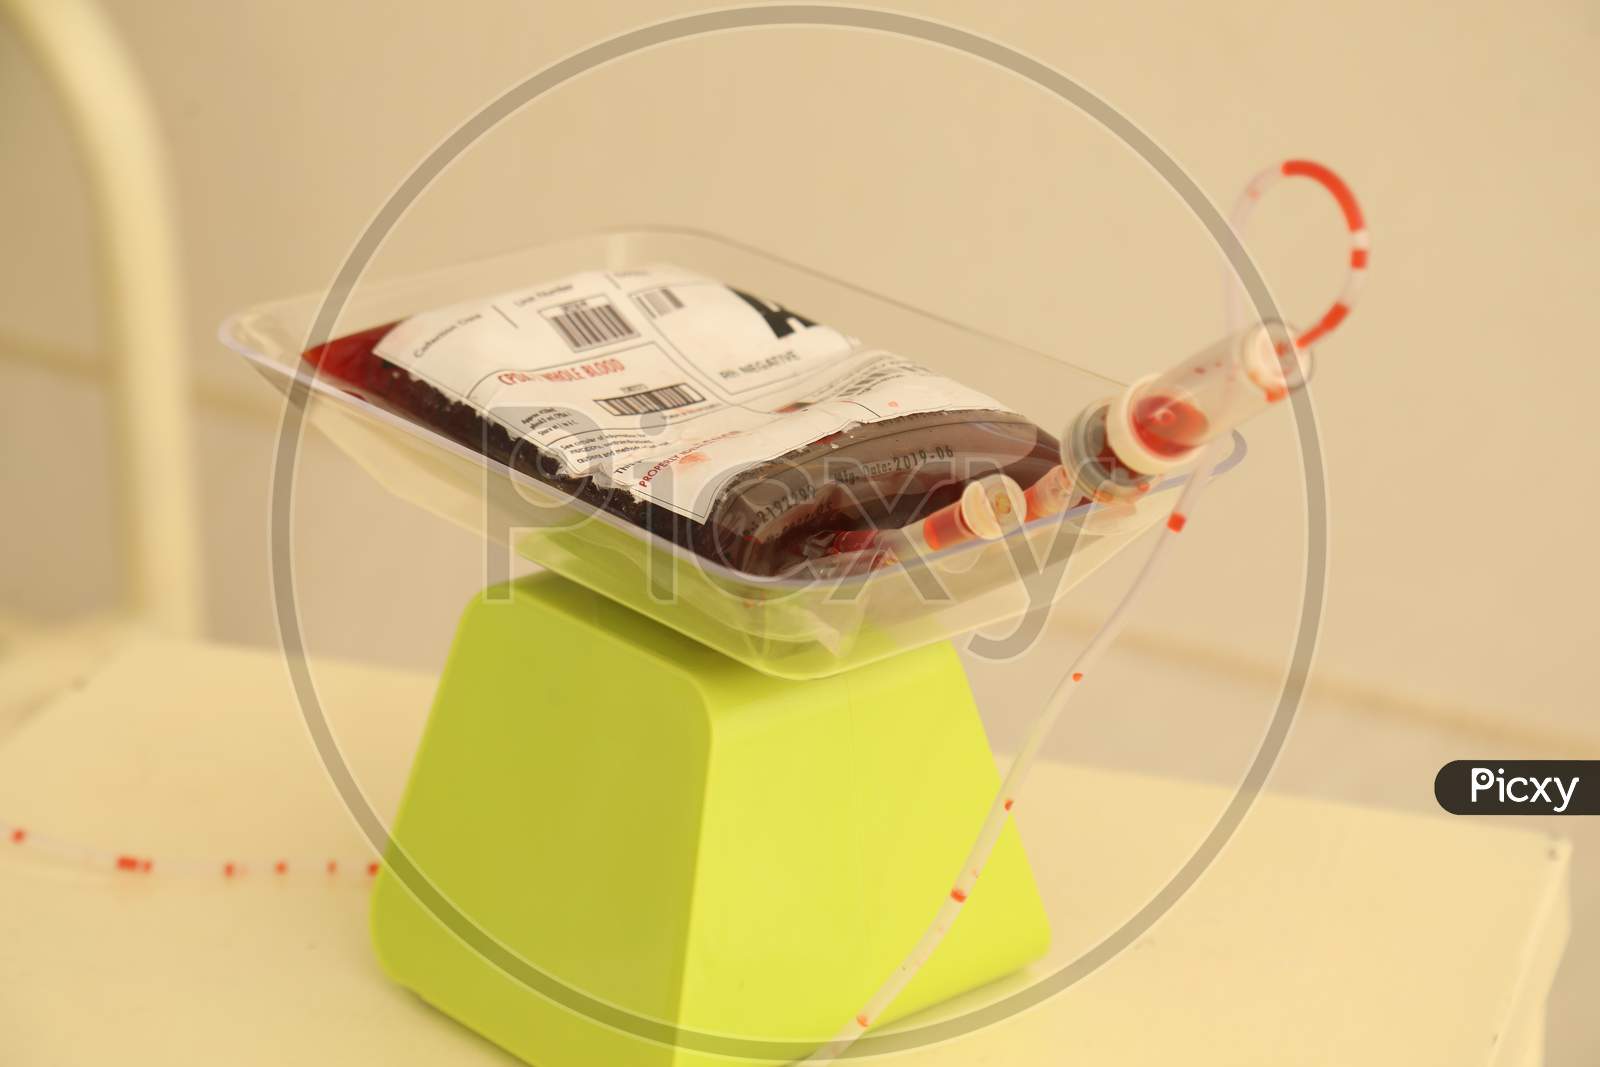 A Blood bag in the hospital